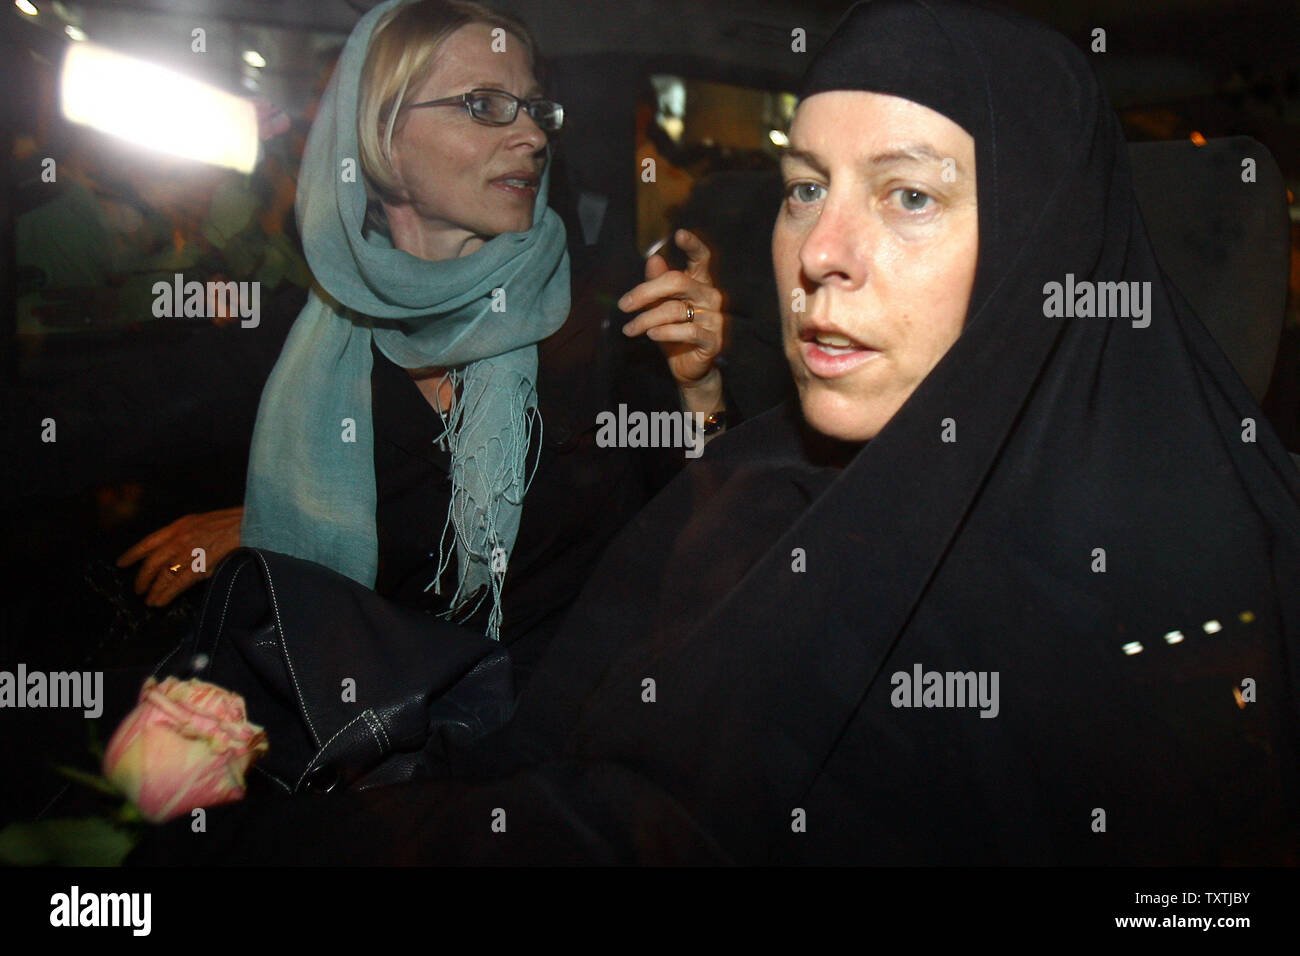 Cindy Hickey, mother of Shane Bauer, sits next to Swiss Ambassador Livia Leu Agosti (L) as they leave Imam Khomeini Airport on May 19, 2010 in Tehran, Iran.  Shane Bauer, 27, Sarah Shourd, 31, and Josh Fattal, 27, were detained on July 31,2009 after straying across Iran's border while on a hiking trip in northern Iraq's Kurdistan region.       UPI/Maryam Rahmanian Stock Photo